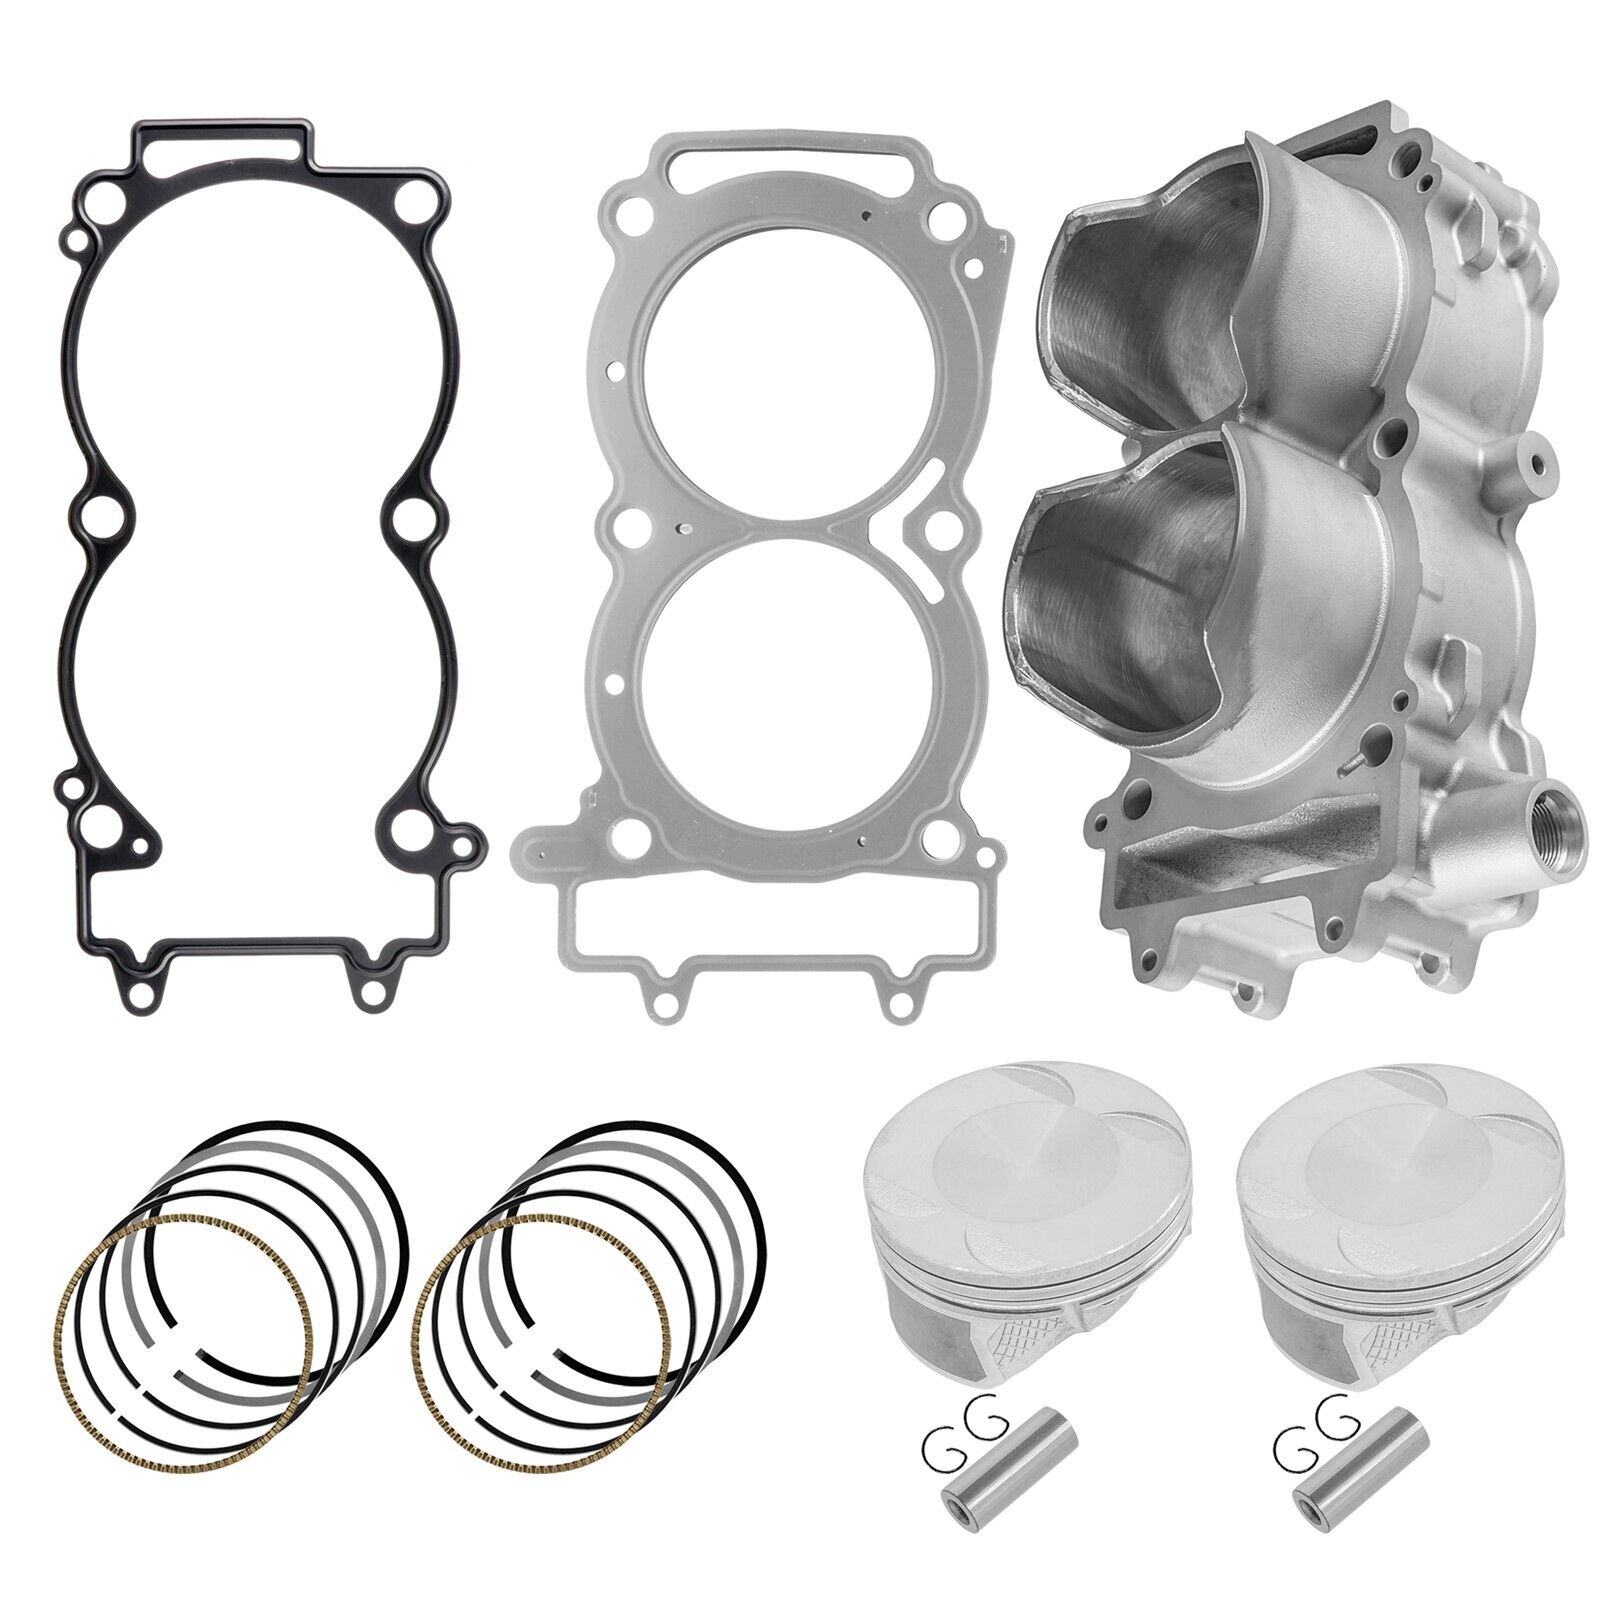 Caltric Cylinder & Piston Ring Kit w/Gaskets For Polaris RZR XP 1000 2014-2018